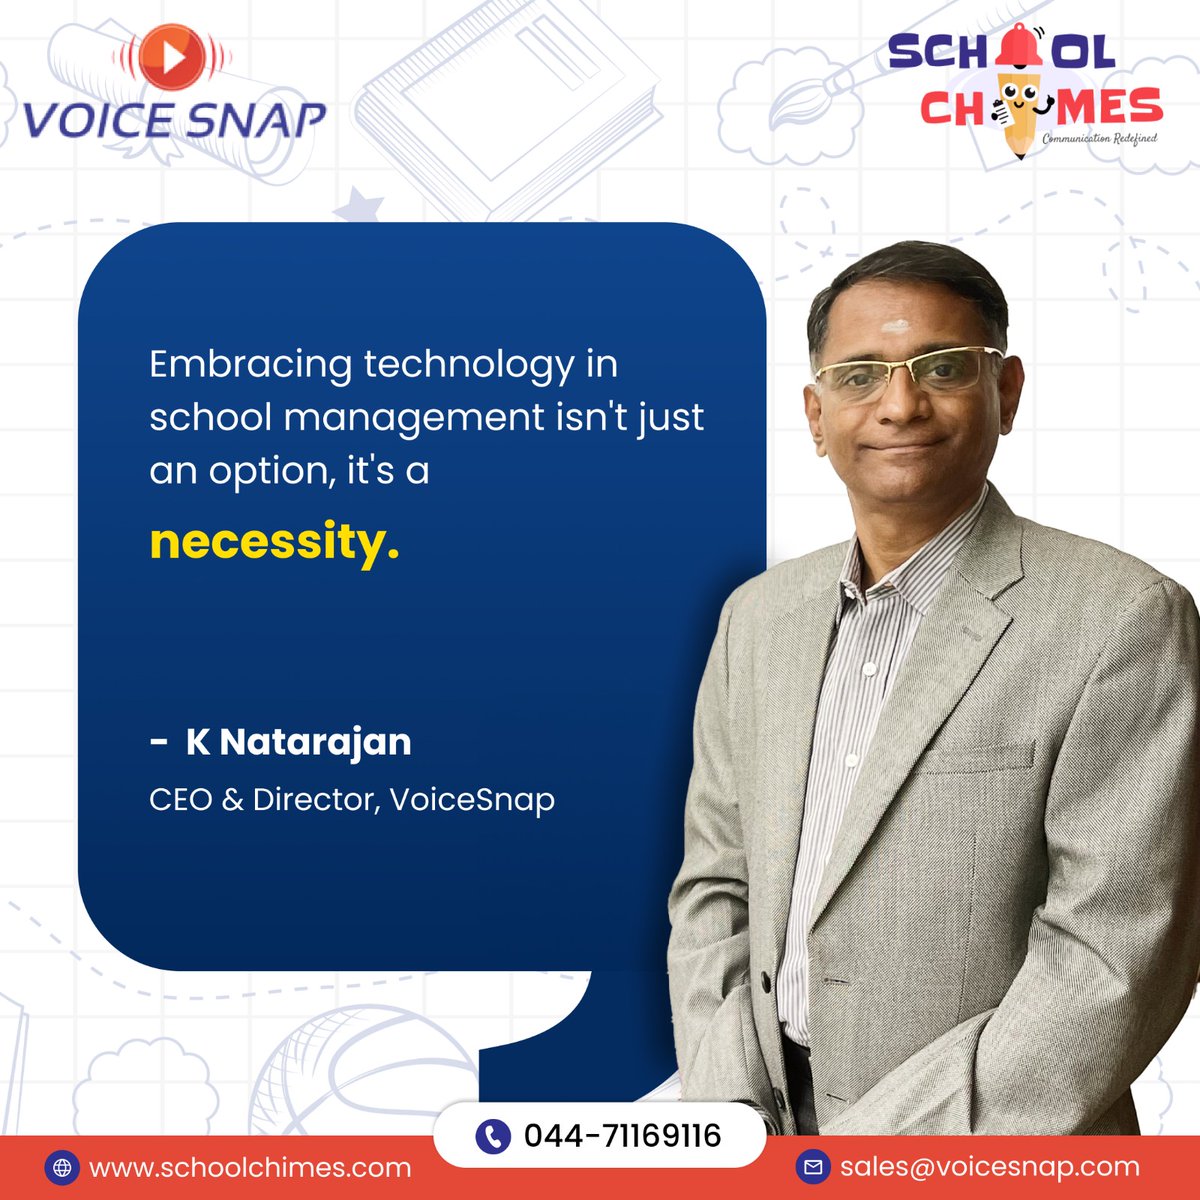 Unlocking the Future 📷
Explore the vision of educational excellence in our 'Visionary Voices' series with our CEO, Natarajan Krishnamurthy

Visit: schoolchimes.com

#VisionaryVoices #EducationLeaders #FutureOfLearning #EdTech #InnovativeEducation #CEOInsights